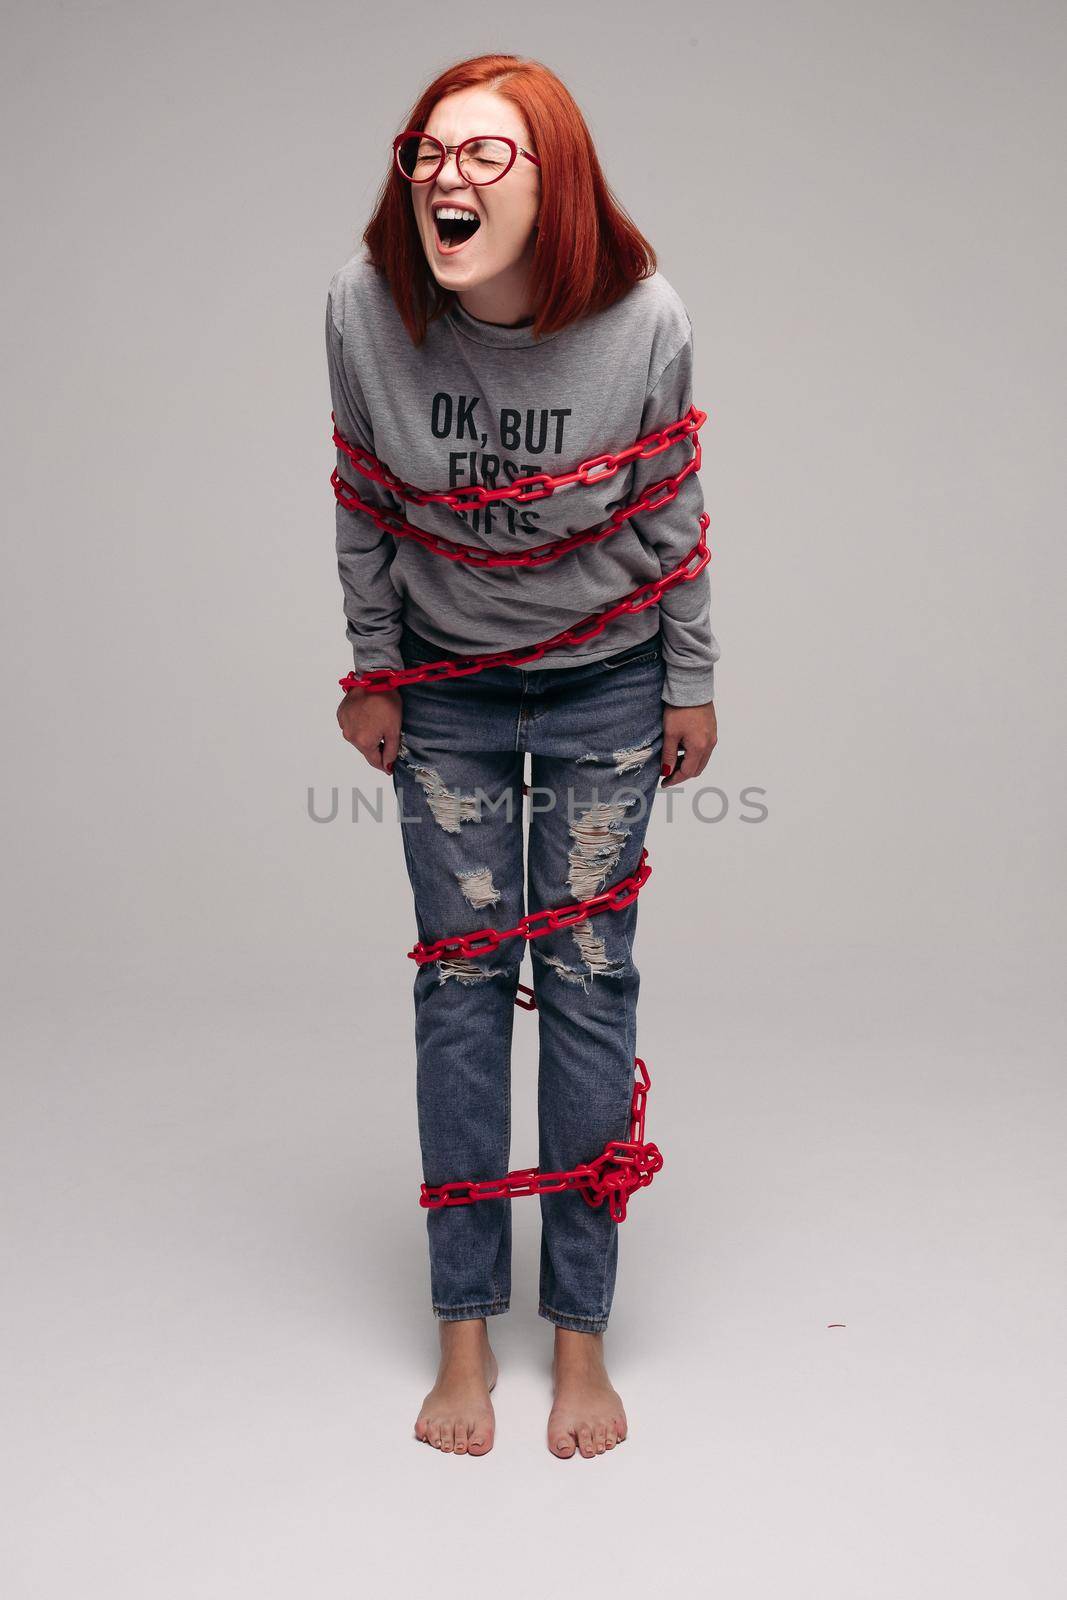 girl entangled in a chain,A red-haired woman with brown hair tries to get rid of the chain by StudioLucky